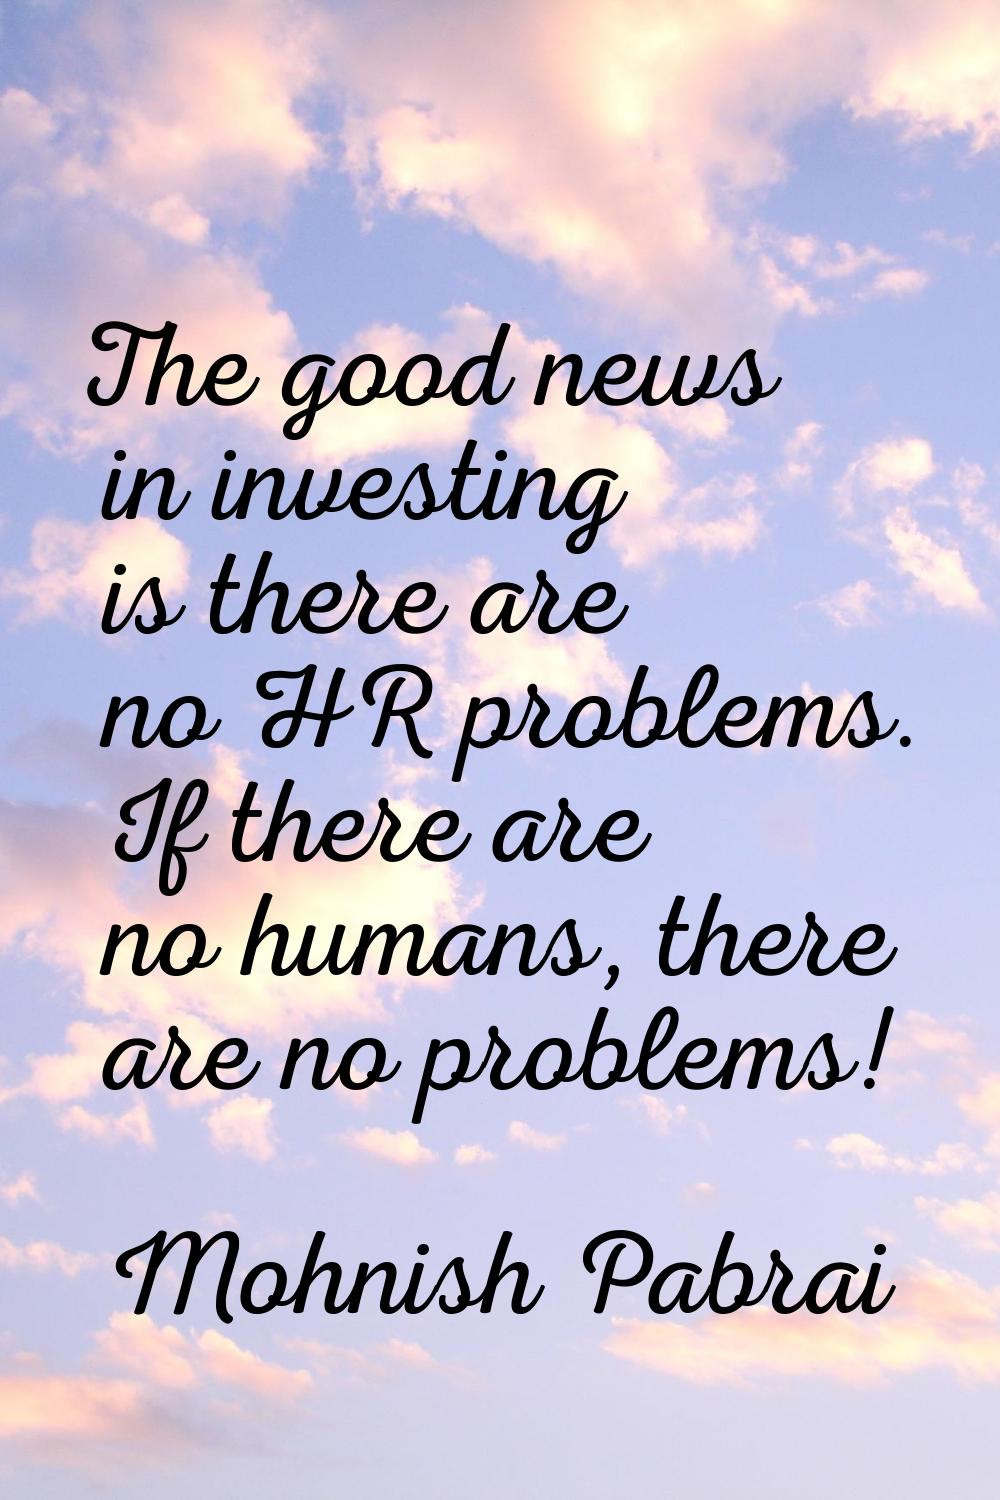 The good news in investing is there are no HR problems. If there are no humans, there are no proble